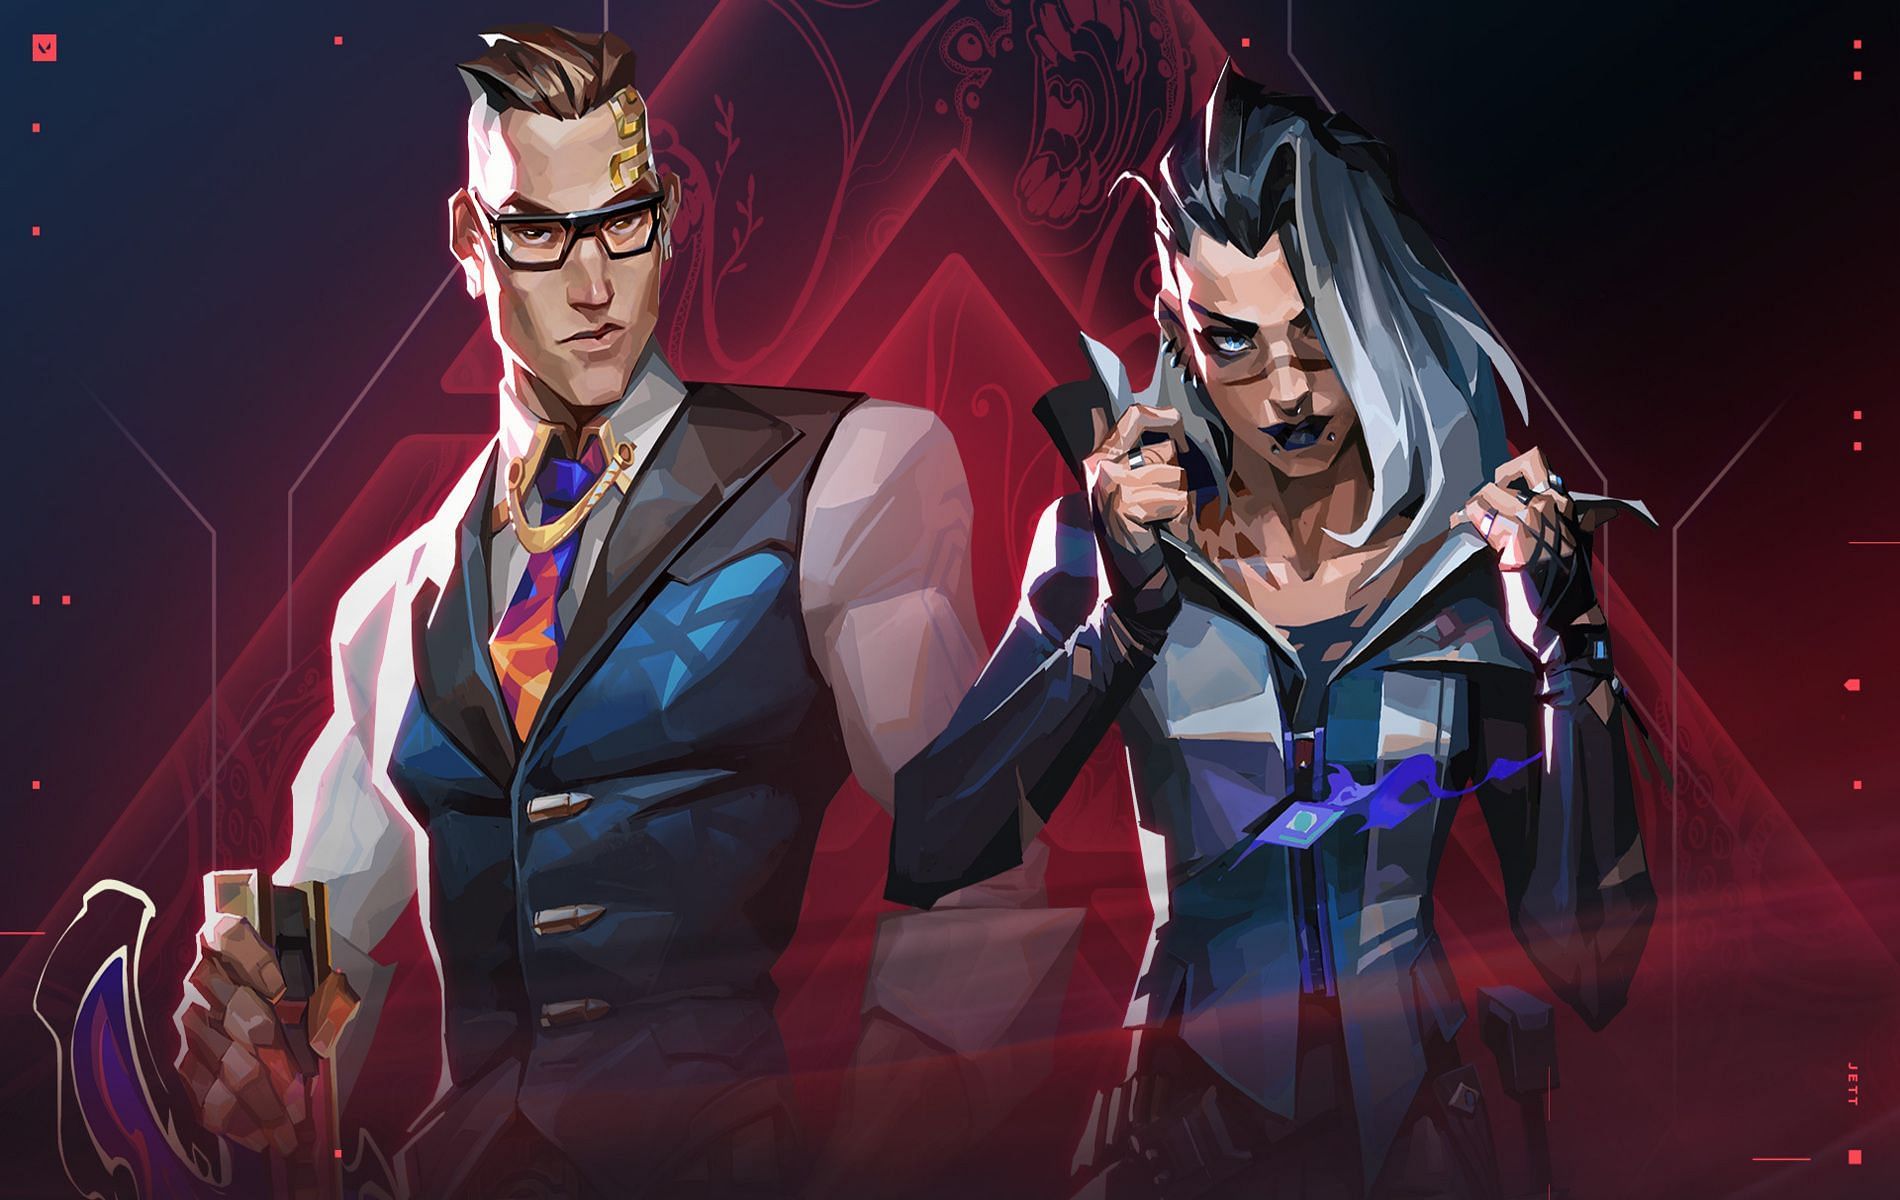 Top 5 Valorant Agents for solo grind to Immortal (Image via Riot Games)